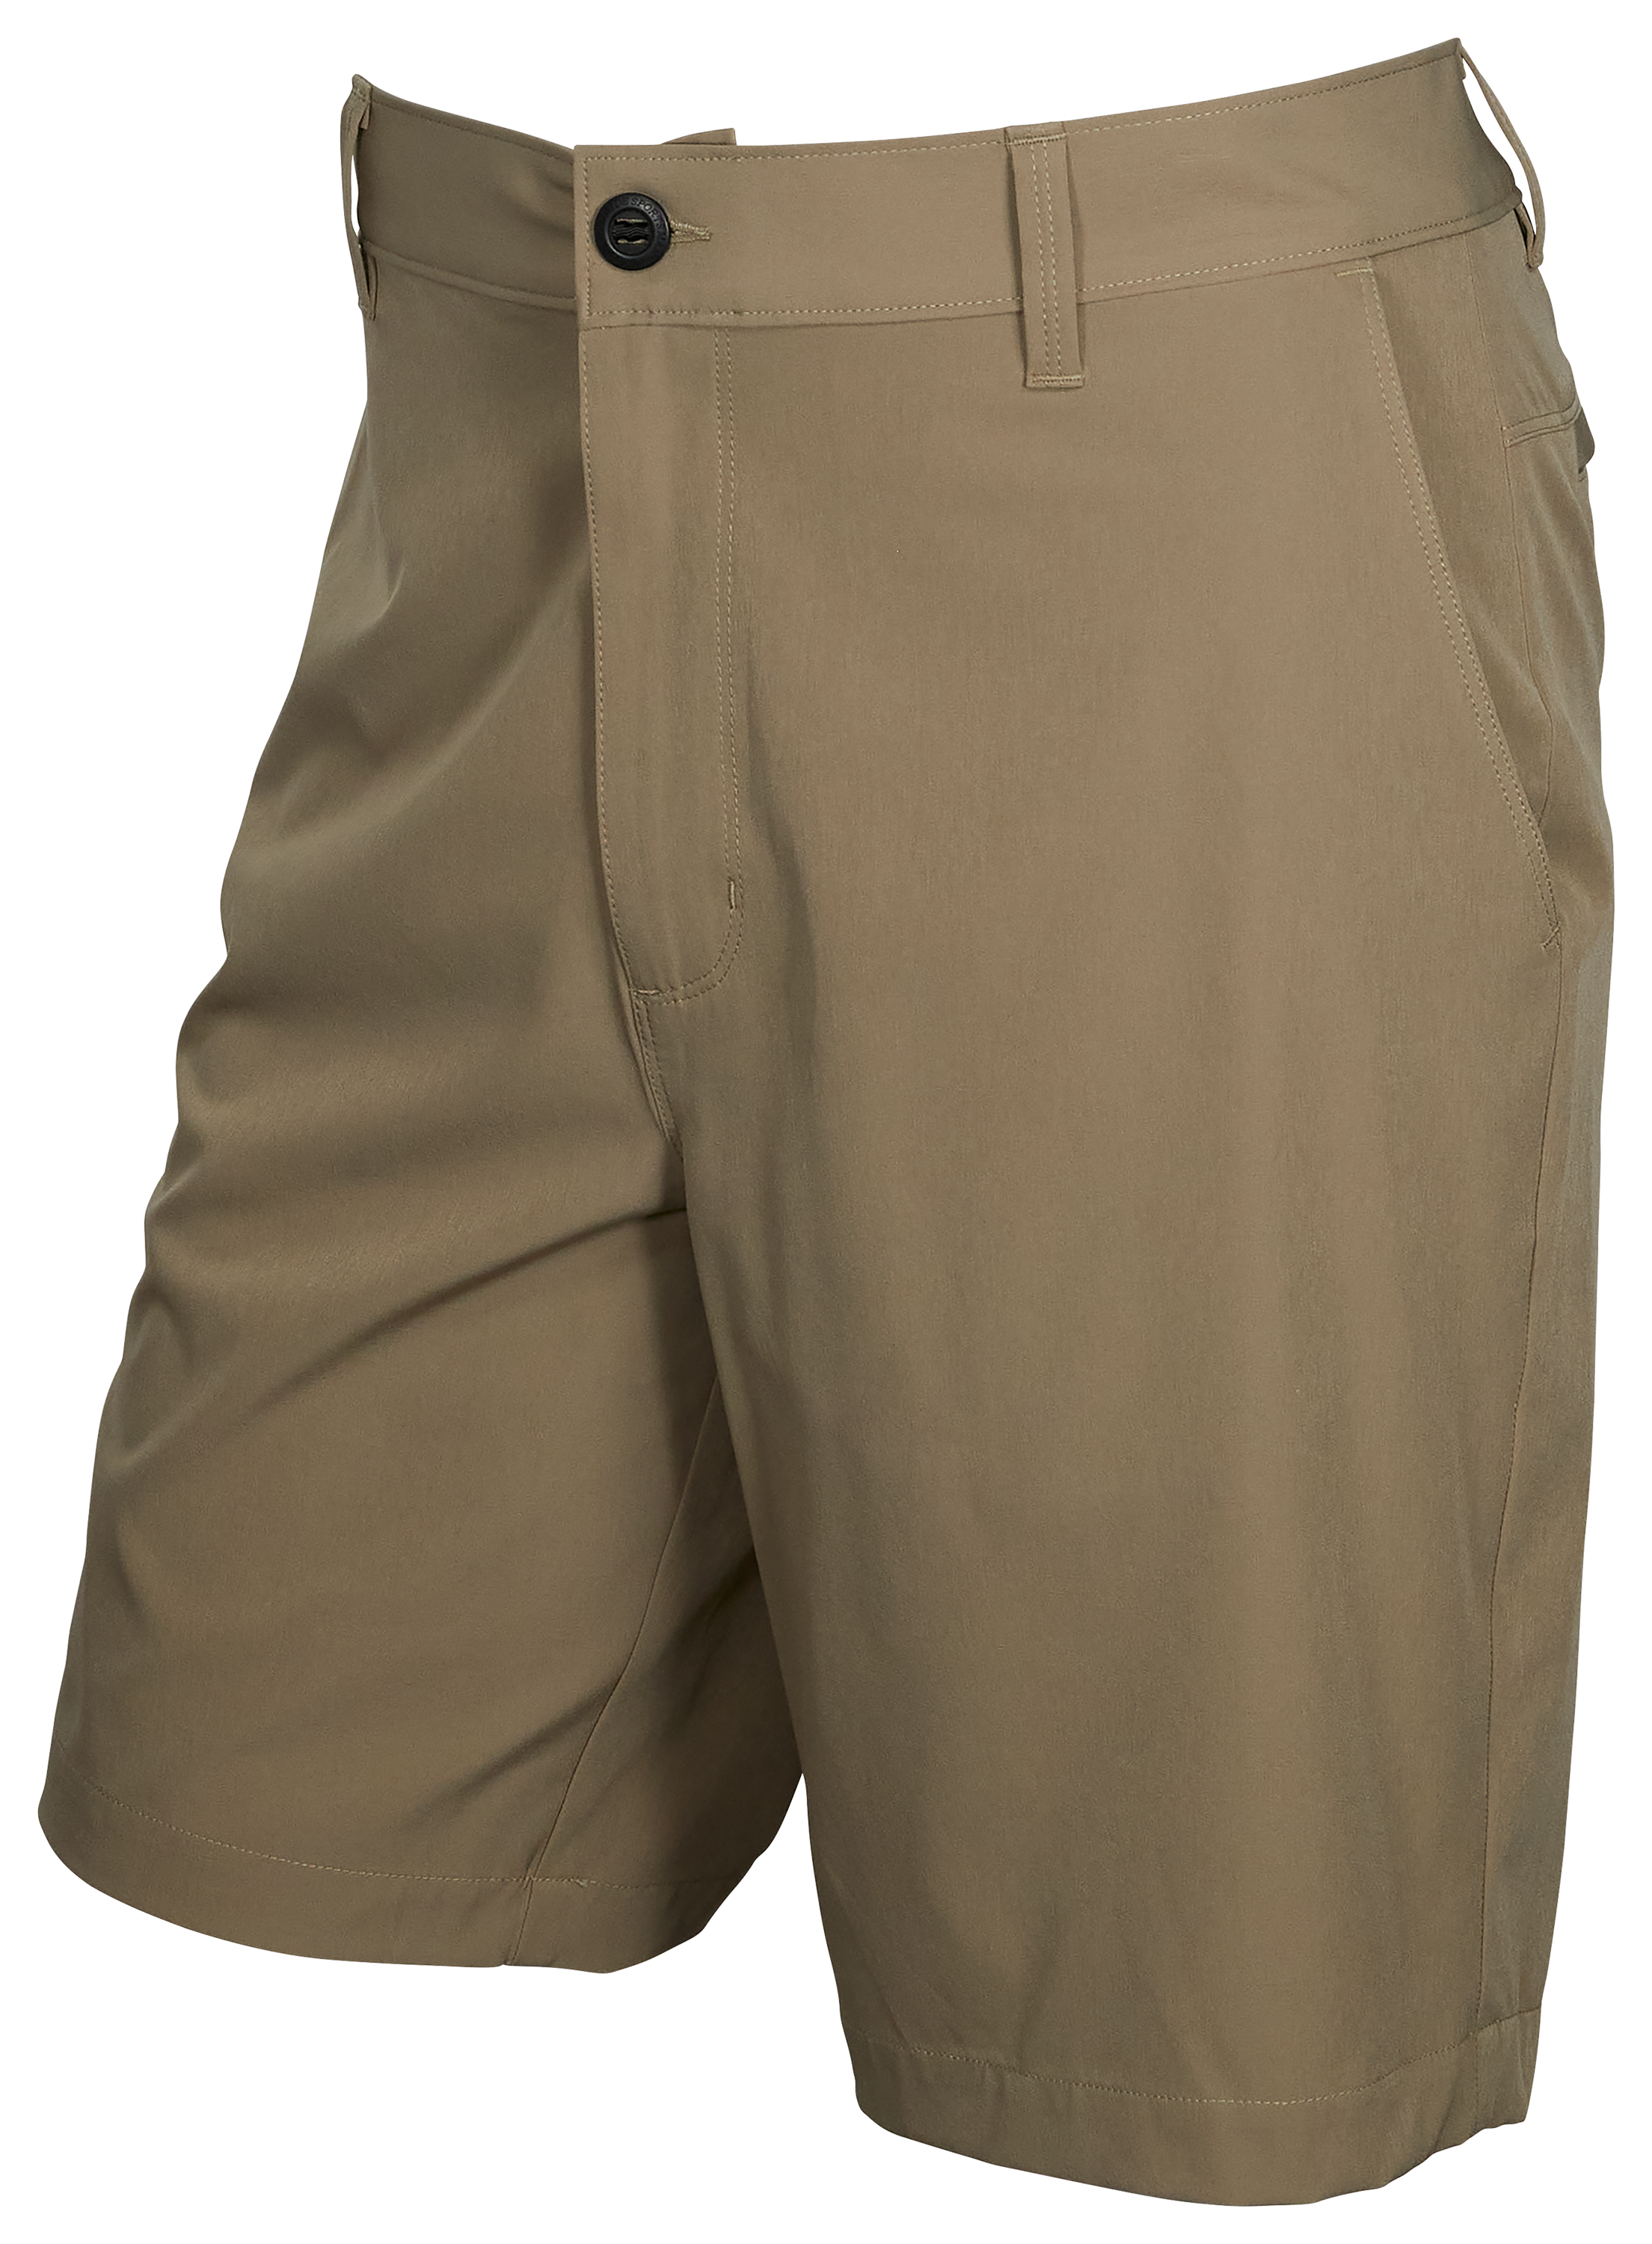 World Wide Sportsman Pescador Stretch Fishing Shorts for Men - Timber - 38